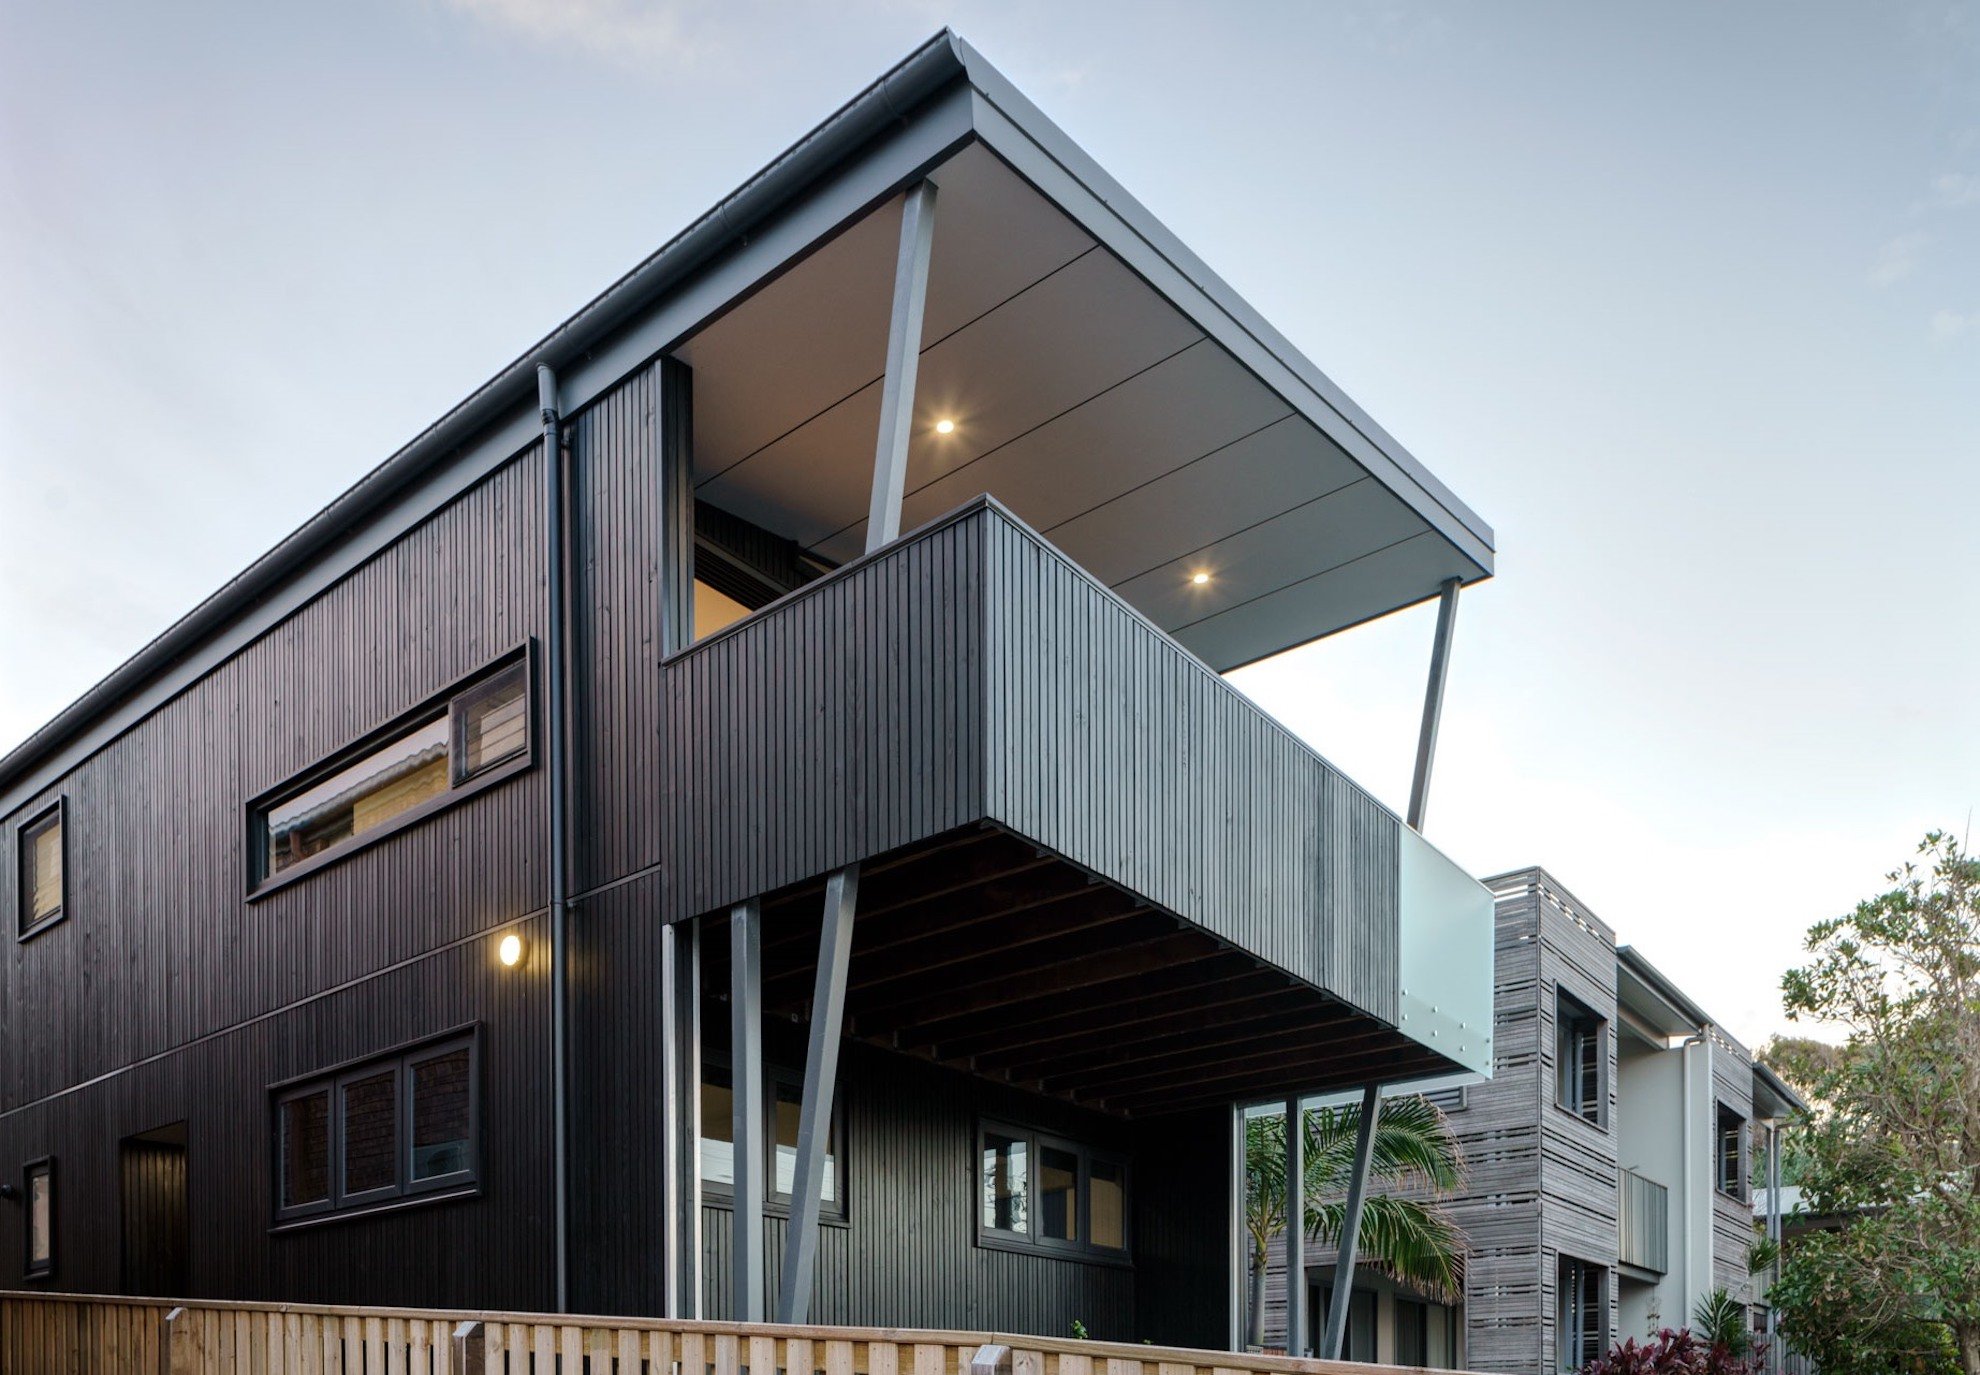 Coolum project by mdesign, a building design practice that operates on the Sunshine Coast.